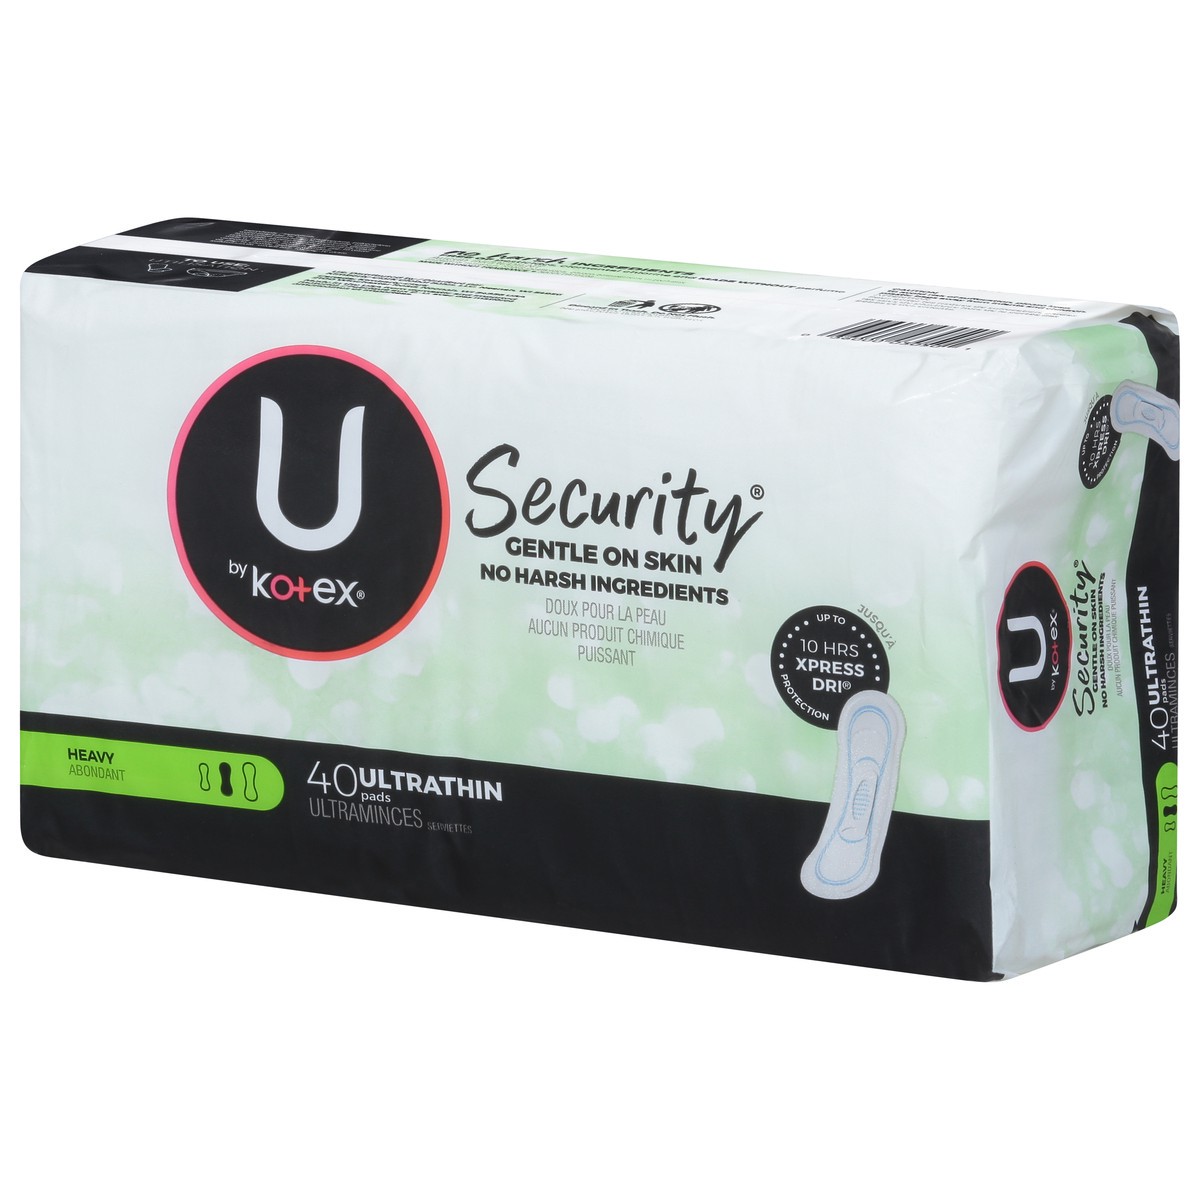 slide 2 of 16, U by Kotex Security Heavy Ultra Thin Pads 40 ea, 40 ct